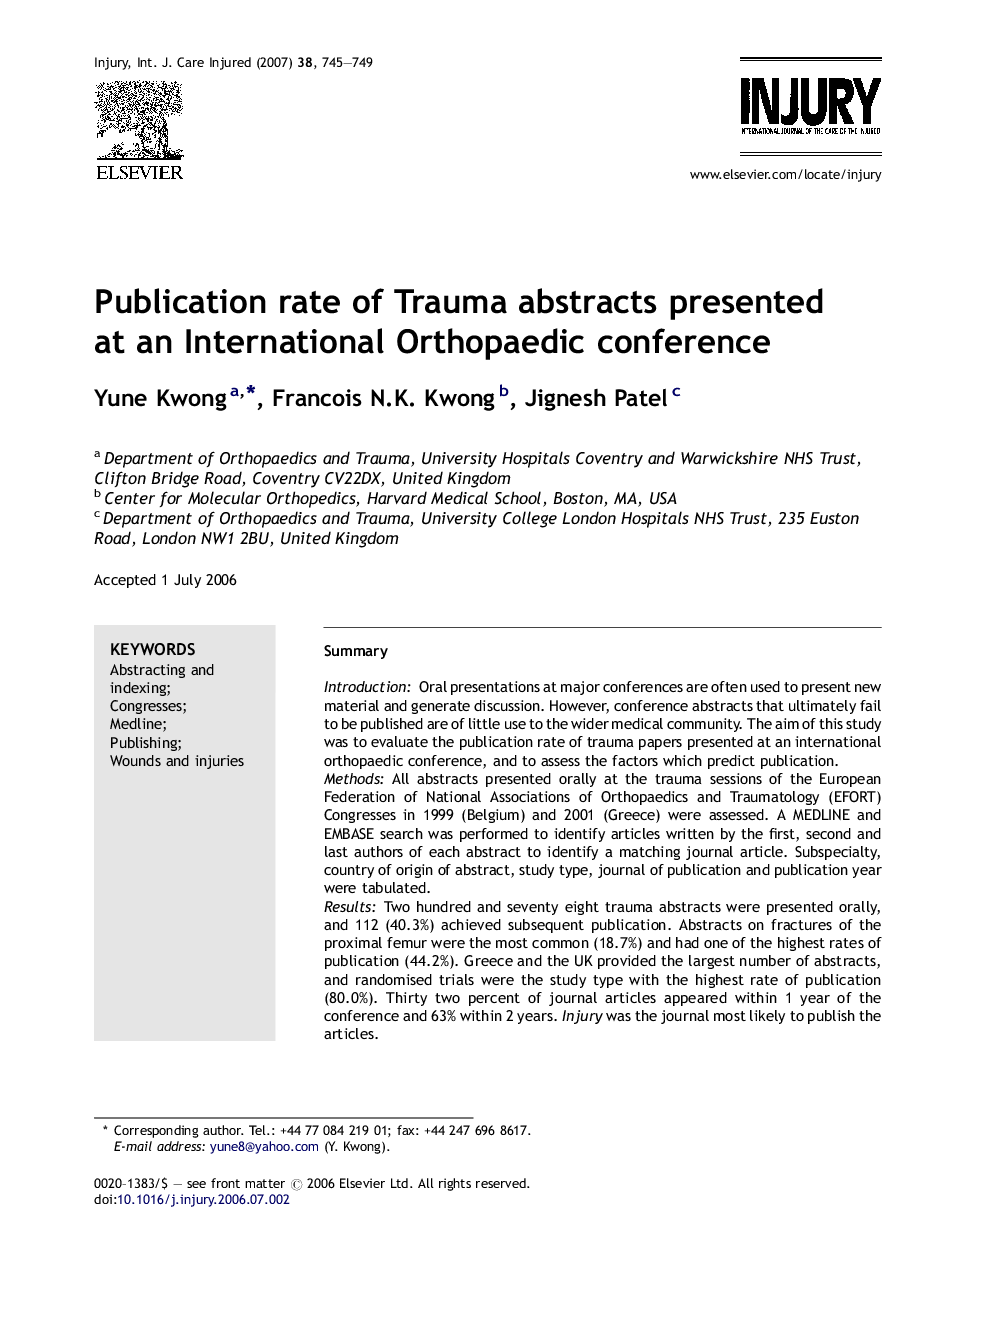 Publication rate of Trauma abstracts presented at an International Orthopaedic conference